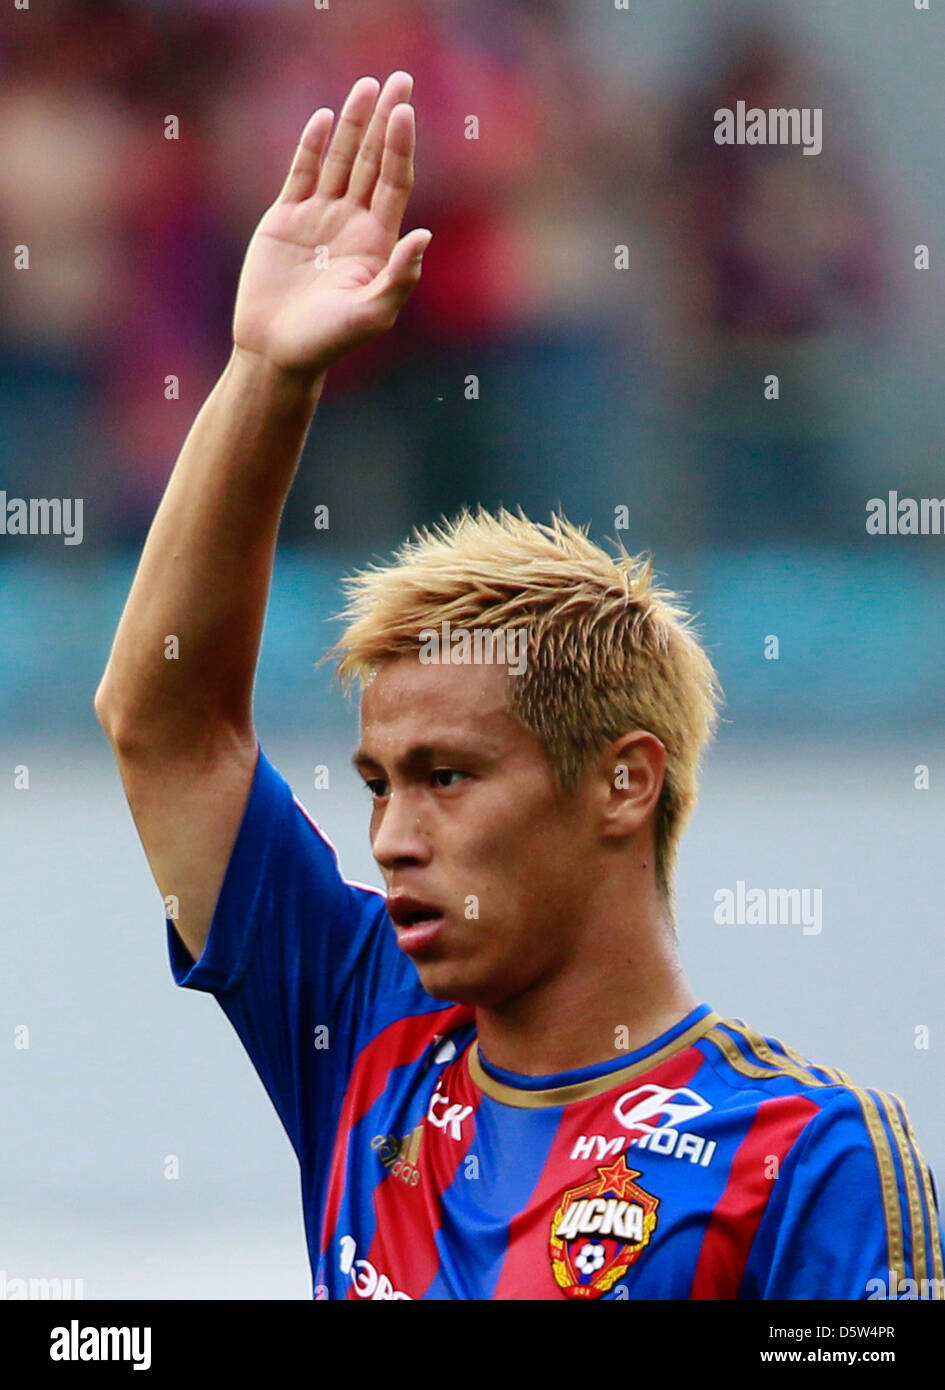 Aug. 12, 2012 - Moscow, MOS, Russia - Moscow,Russia. Russian Premier League. Pictured: Japanese footballer Keisuke Honda. Keisuke Honda   ( &#26412;&#30000; &#22317;&#20305;  , Honda Keisuke , born 13 June 1986) is a Japanese footballer who currently plays for Russian Premier League CSKA Moscow FC. (Credit Image: © Dmitry Korotayev/PhotoXpress/ZUMAPRESS.com) Stock Photo